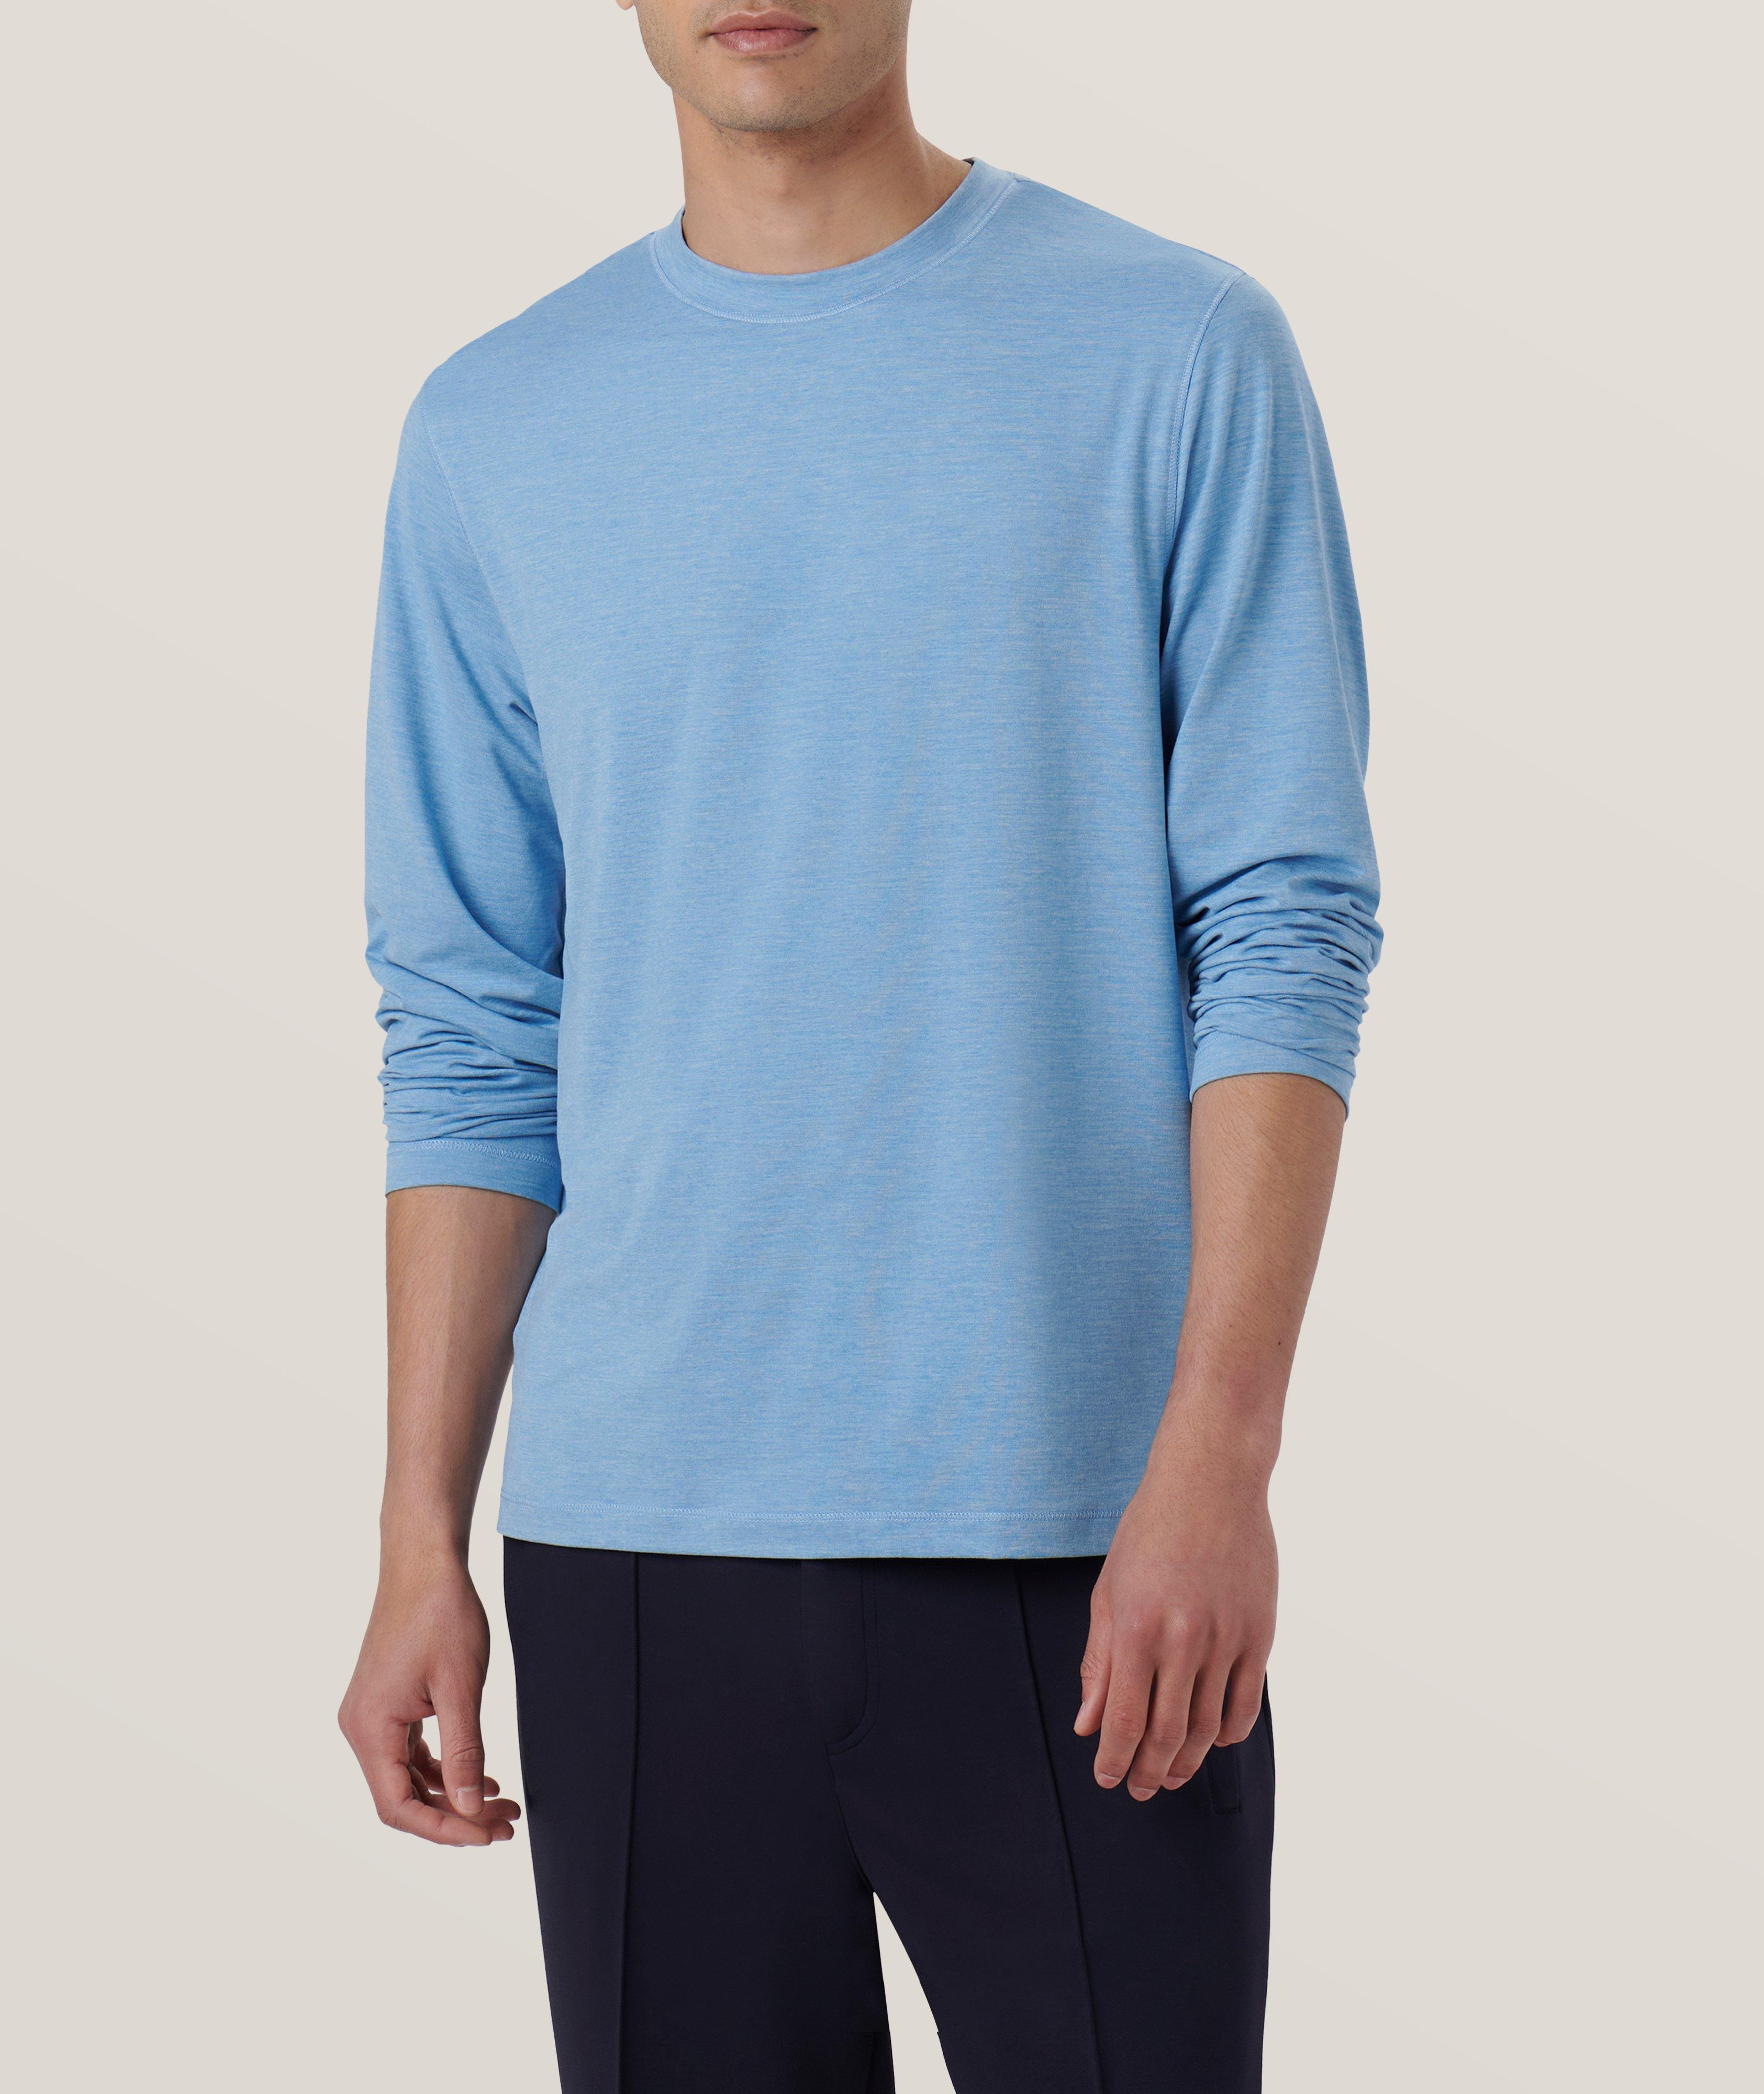 4-Way Stretch UV50 Performance Pullover image 2